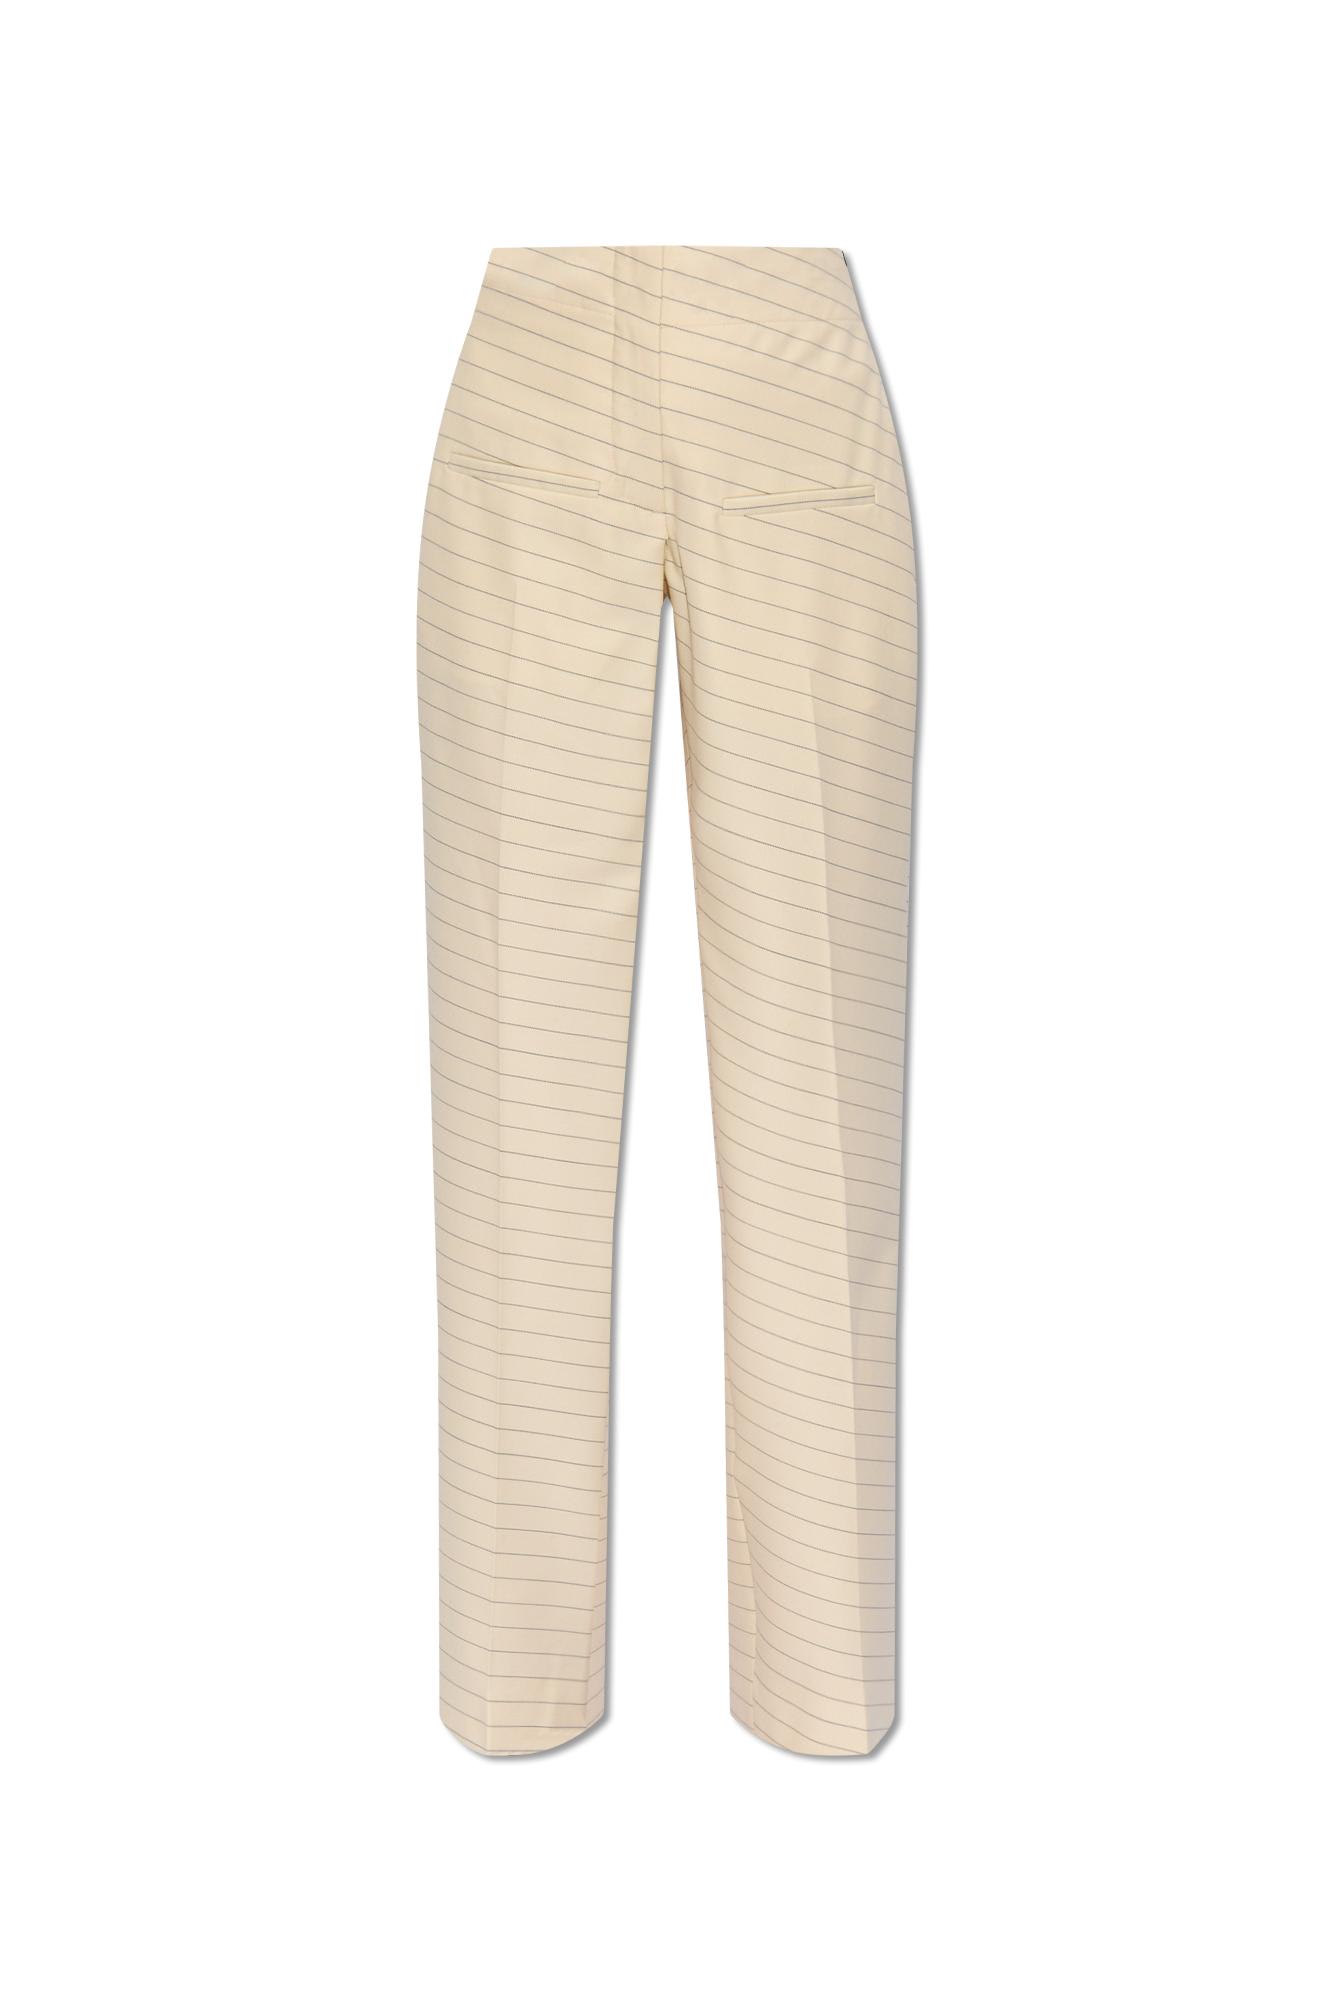 J.W. Anderson Pleat-front Trousers